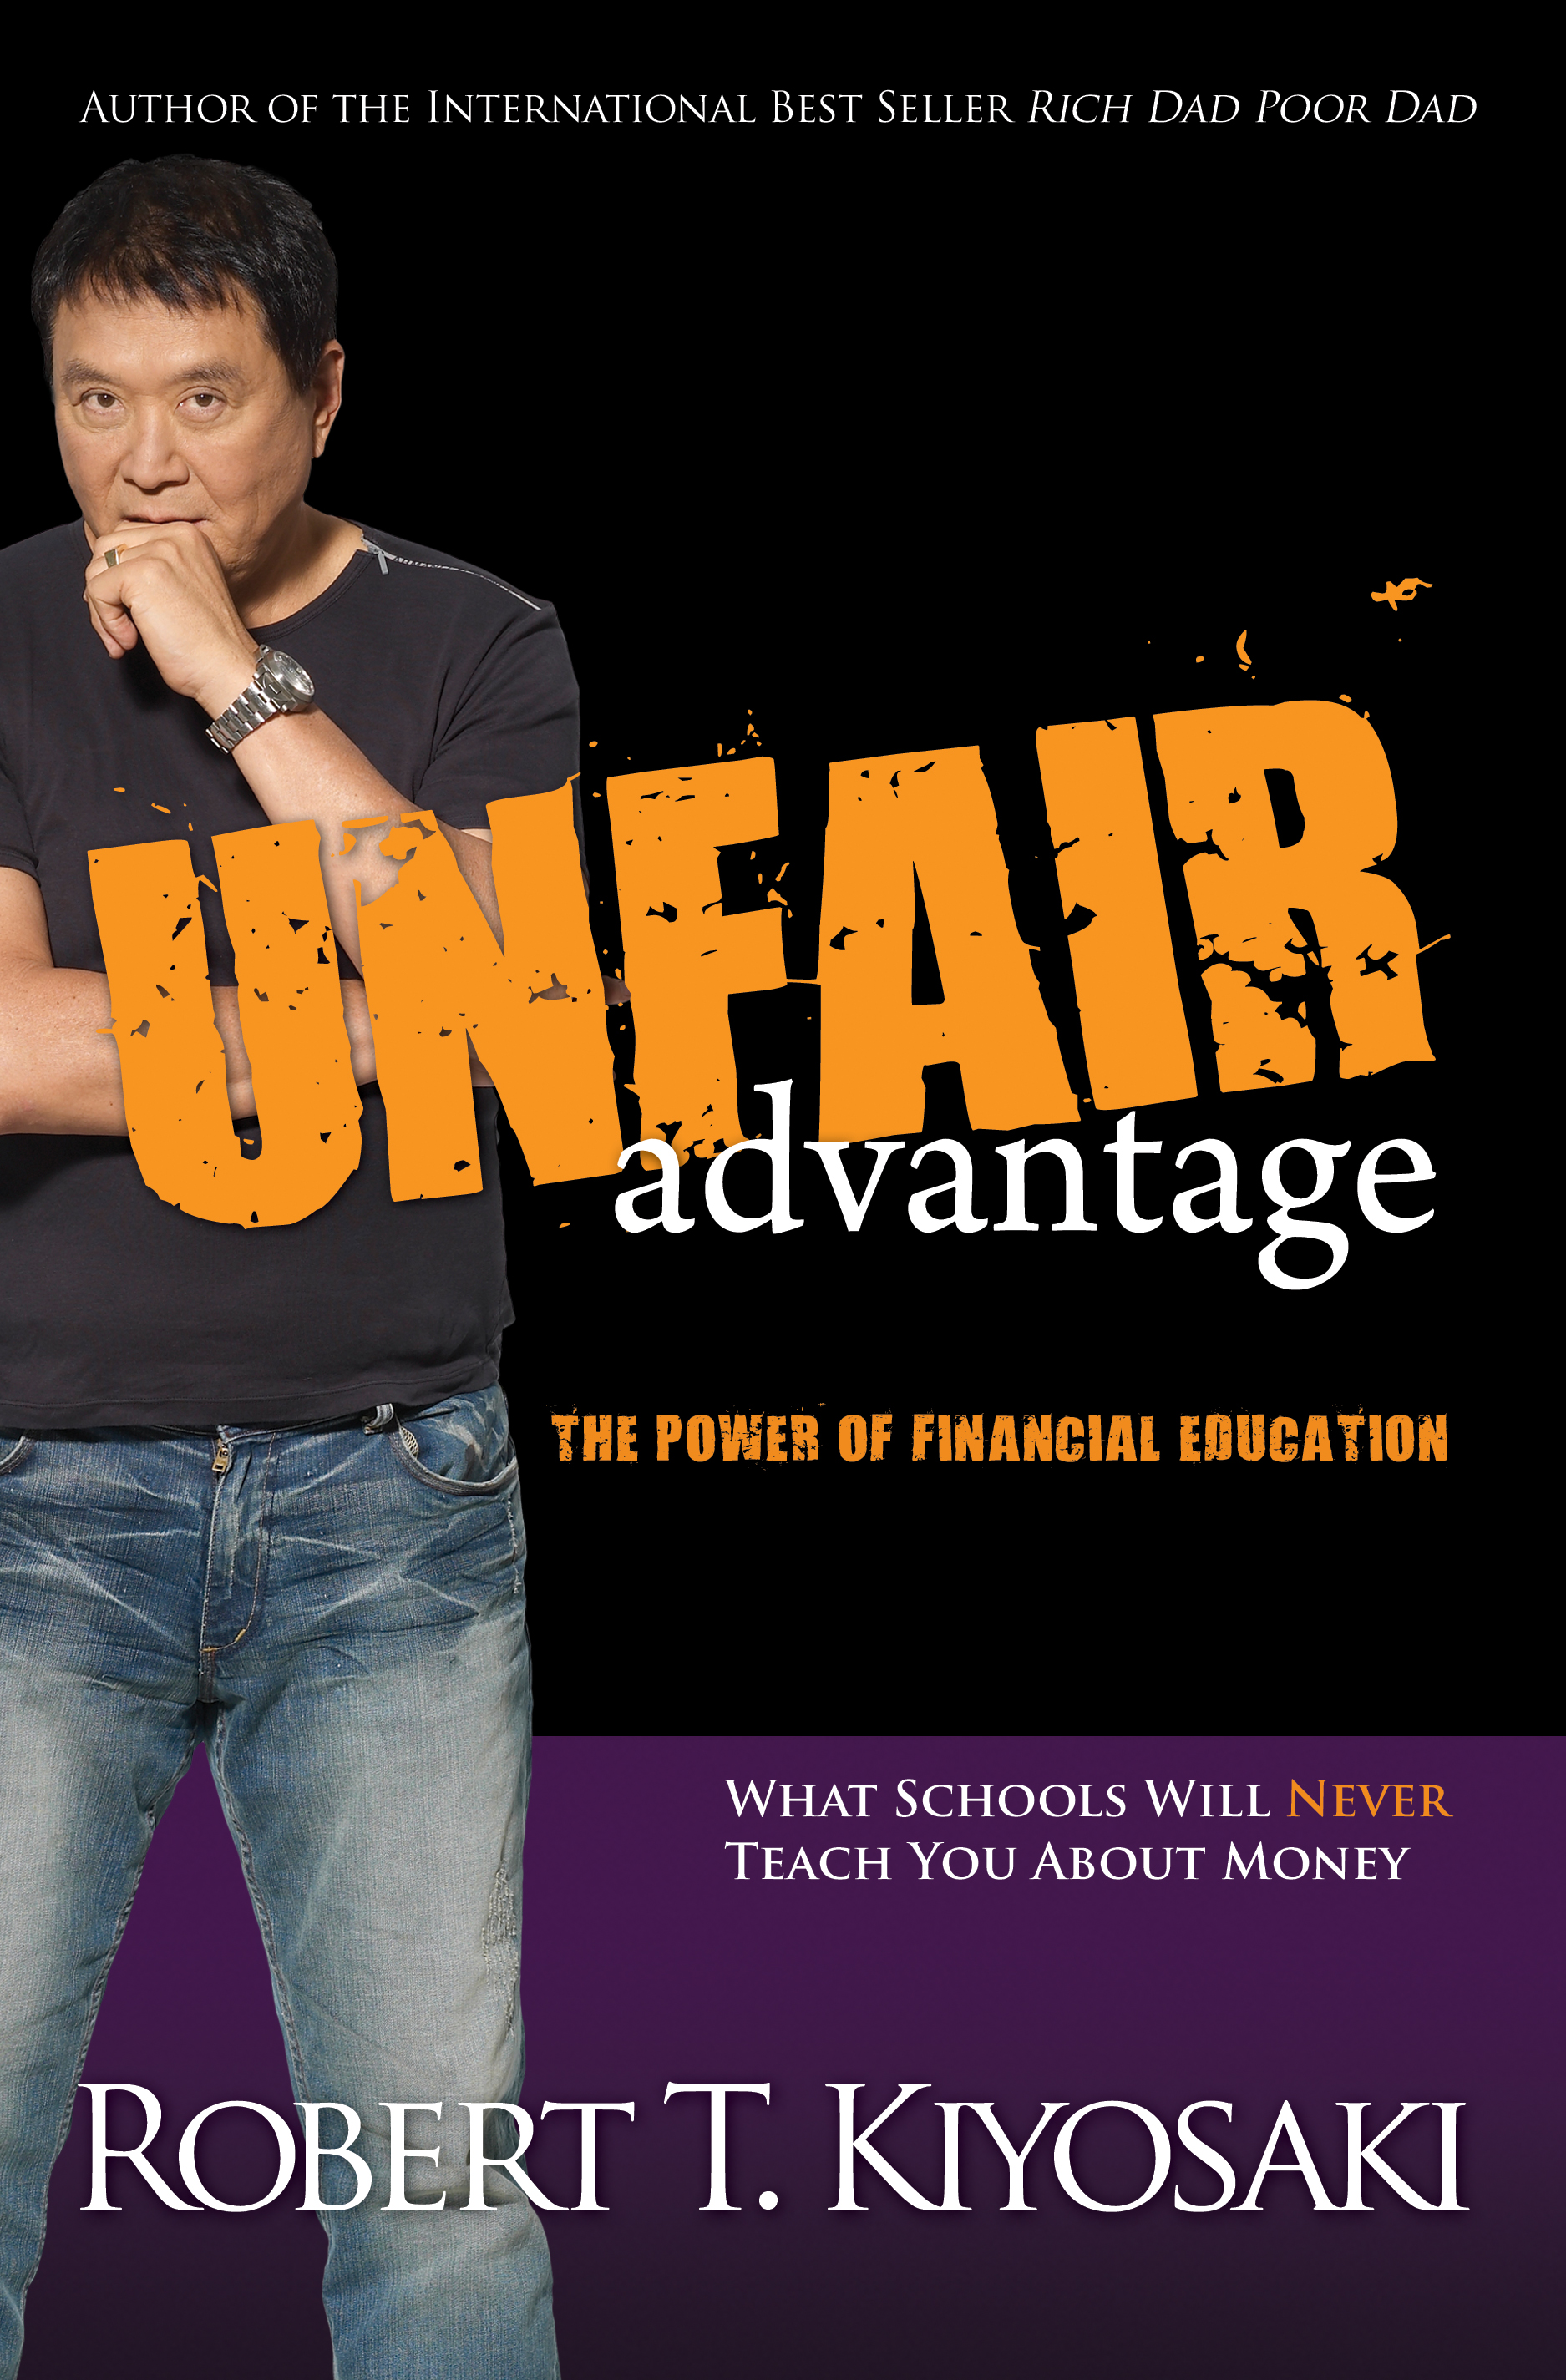 Rich Dad Author Empowers Entrepreneurs with 5 Unfair Advantages in New Book